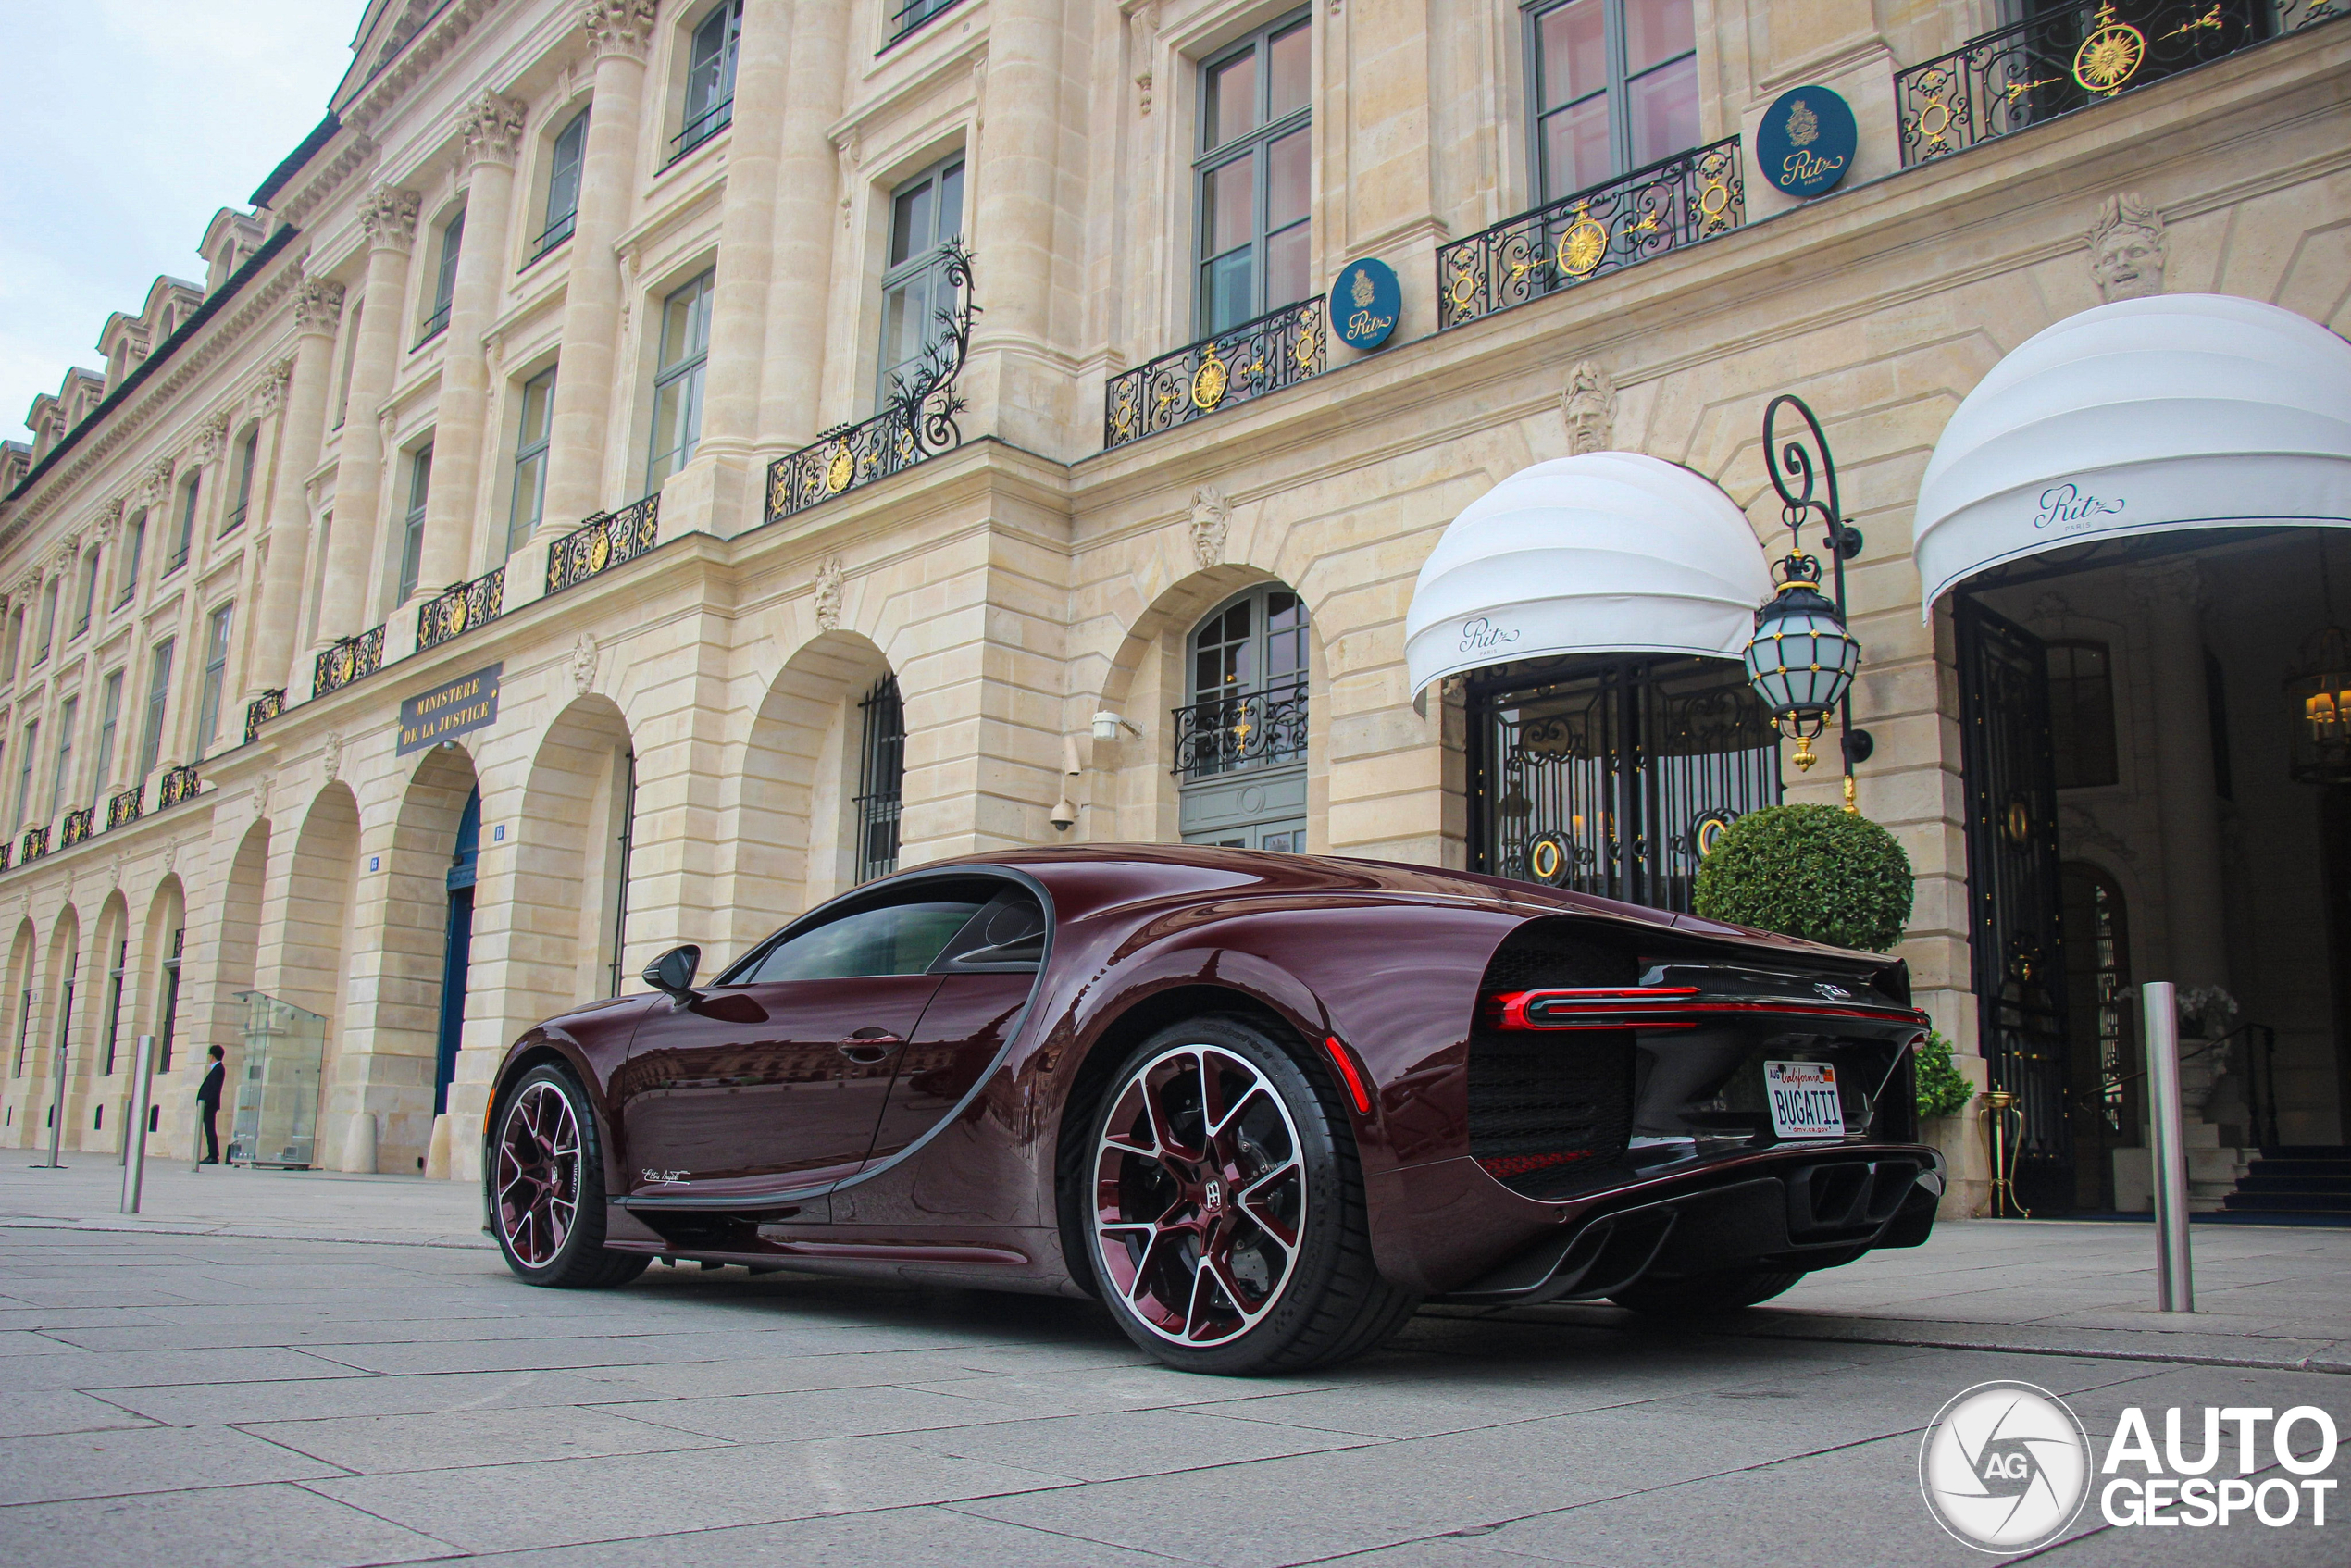 Is this the most beautiful Chiron?